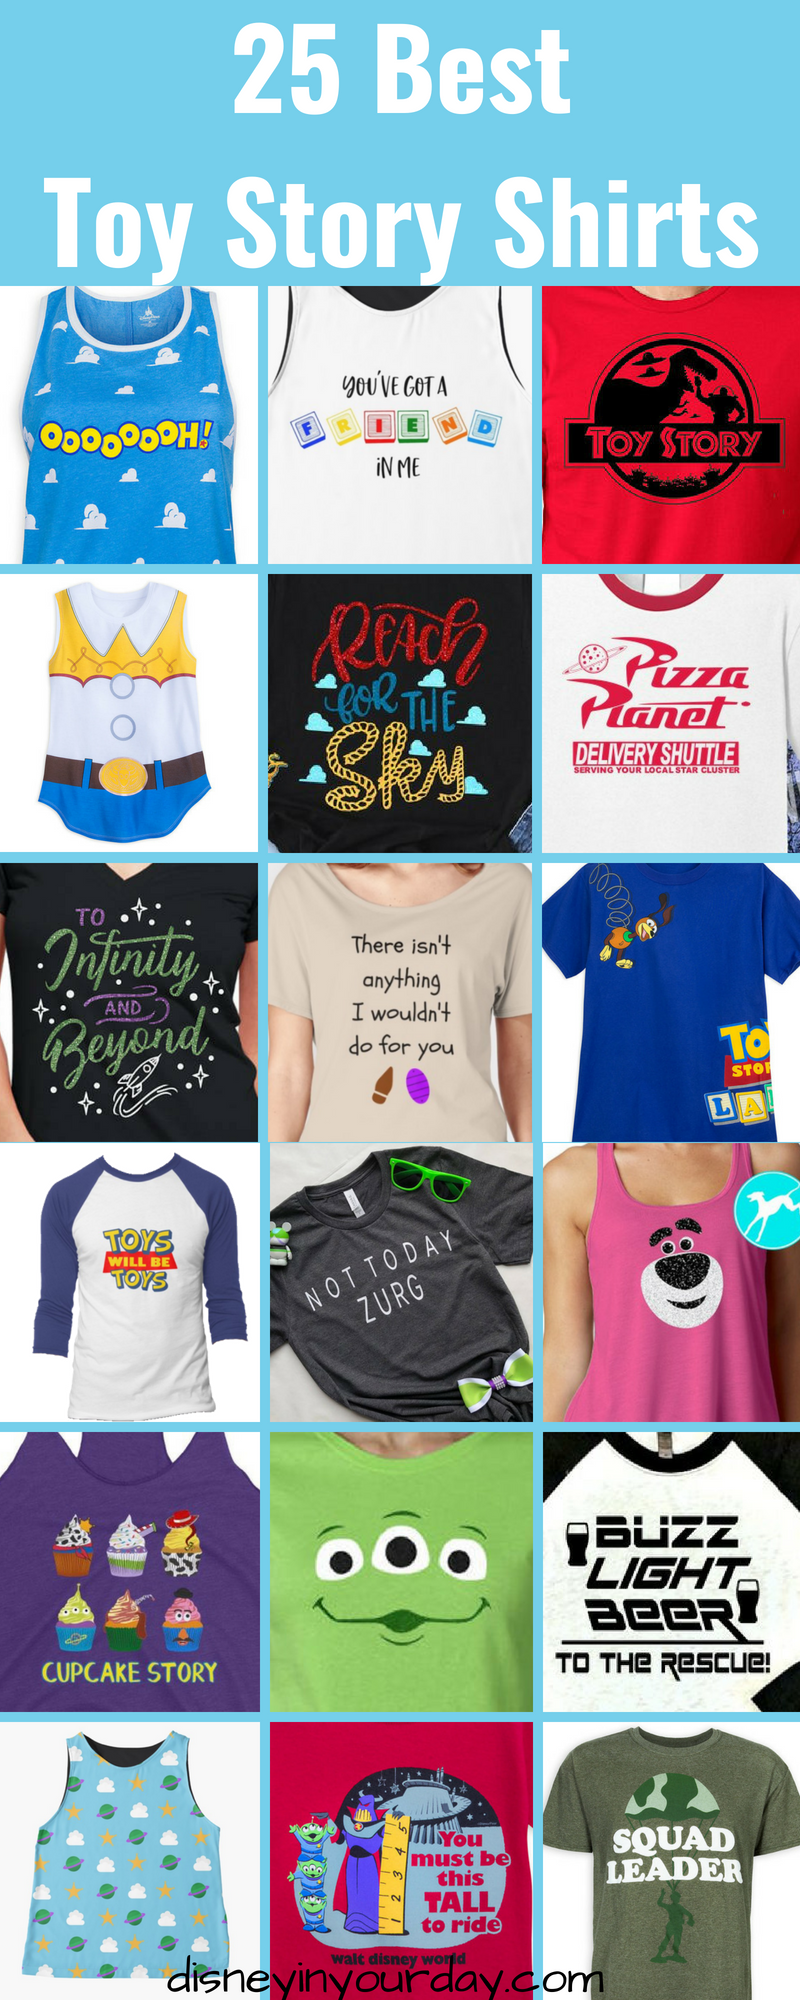 25 best Toy Story shirts -   25 cool disney crafts
 ideas